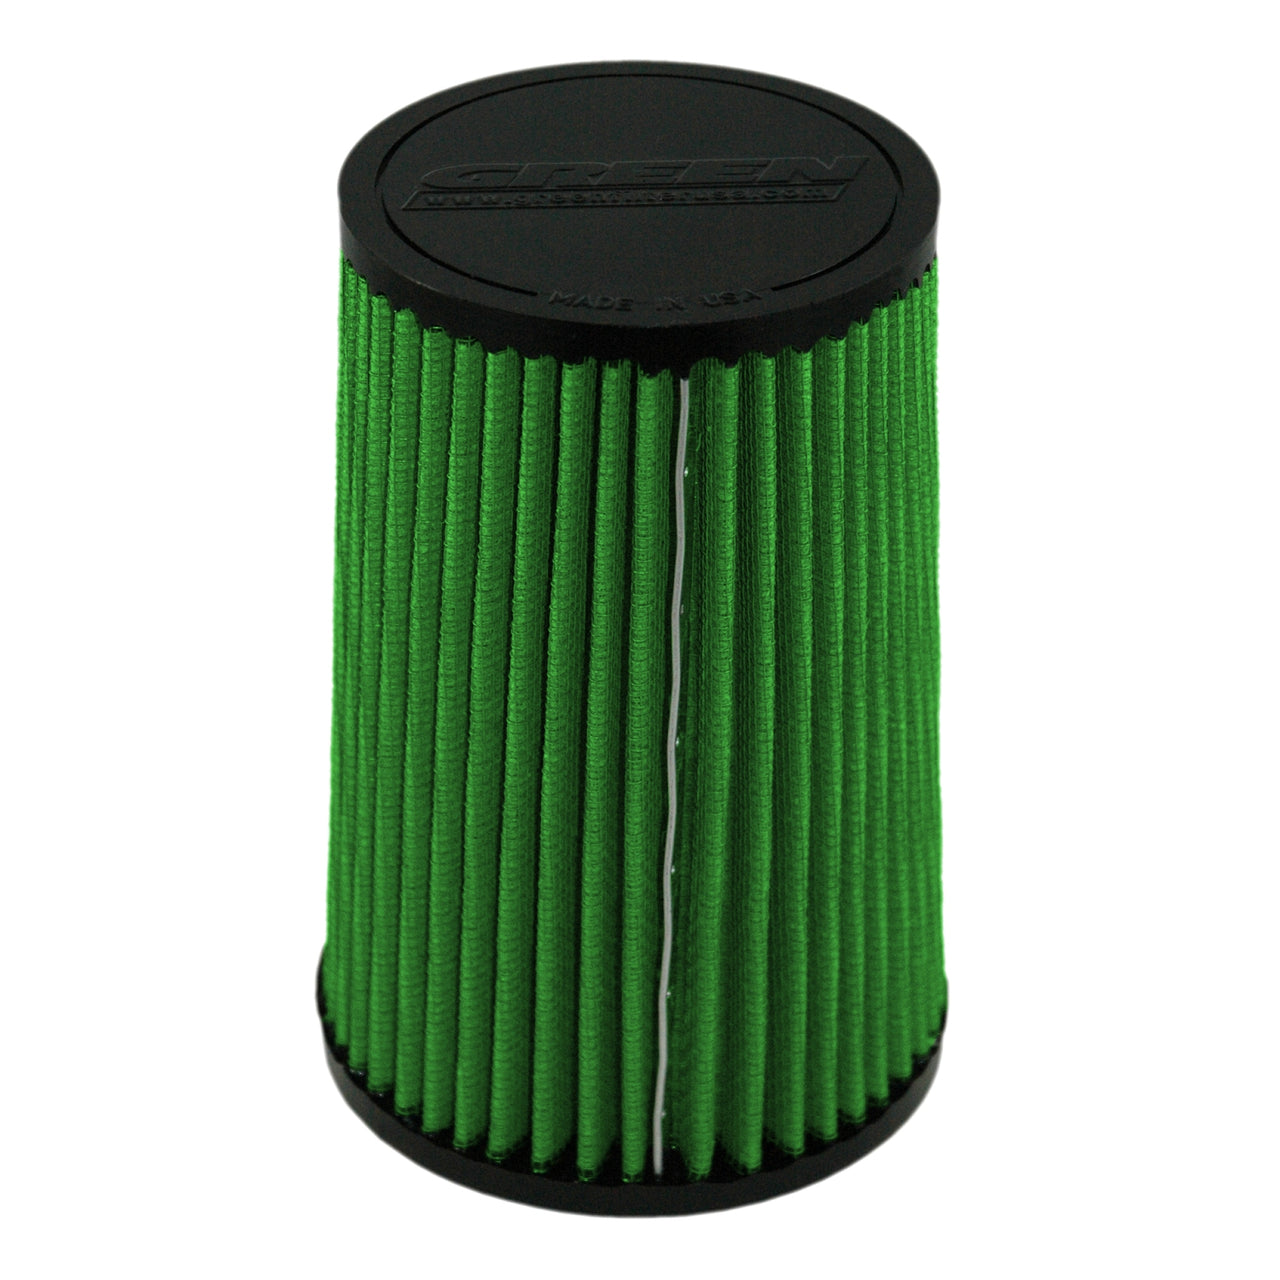 Green Filter Cone Filter - ID 2.75in. / Base 4.75in. / Top 4in. / H 7in.